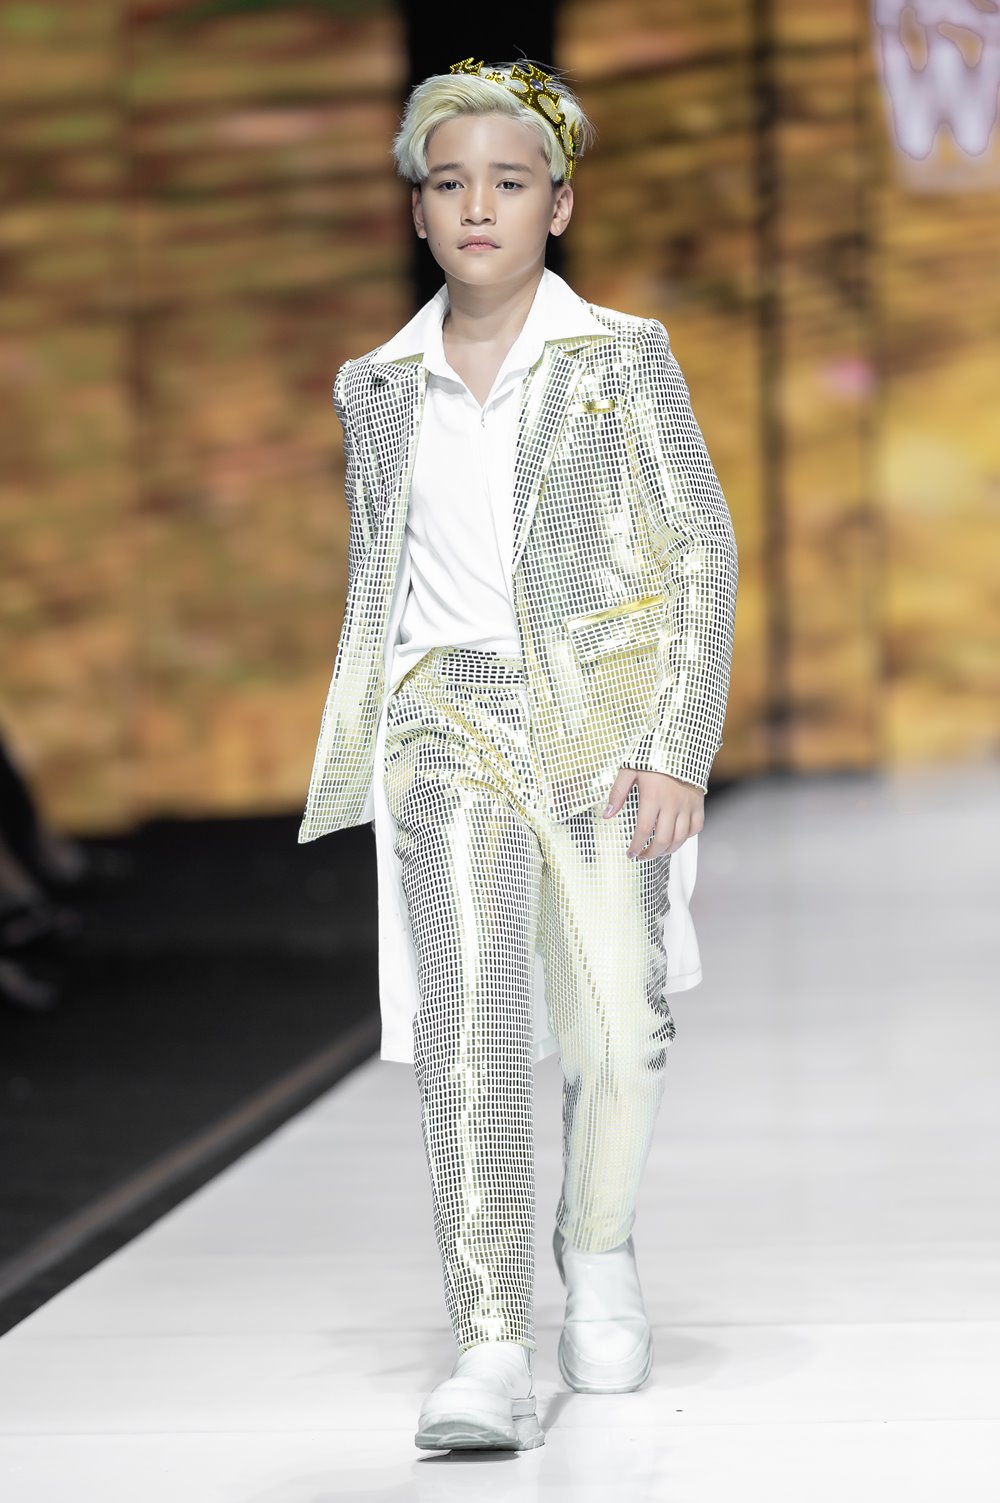 "Children of the Sun"  in the collection of designer Thao Nguyen - 4